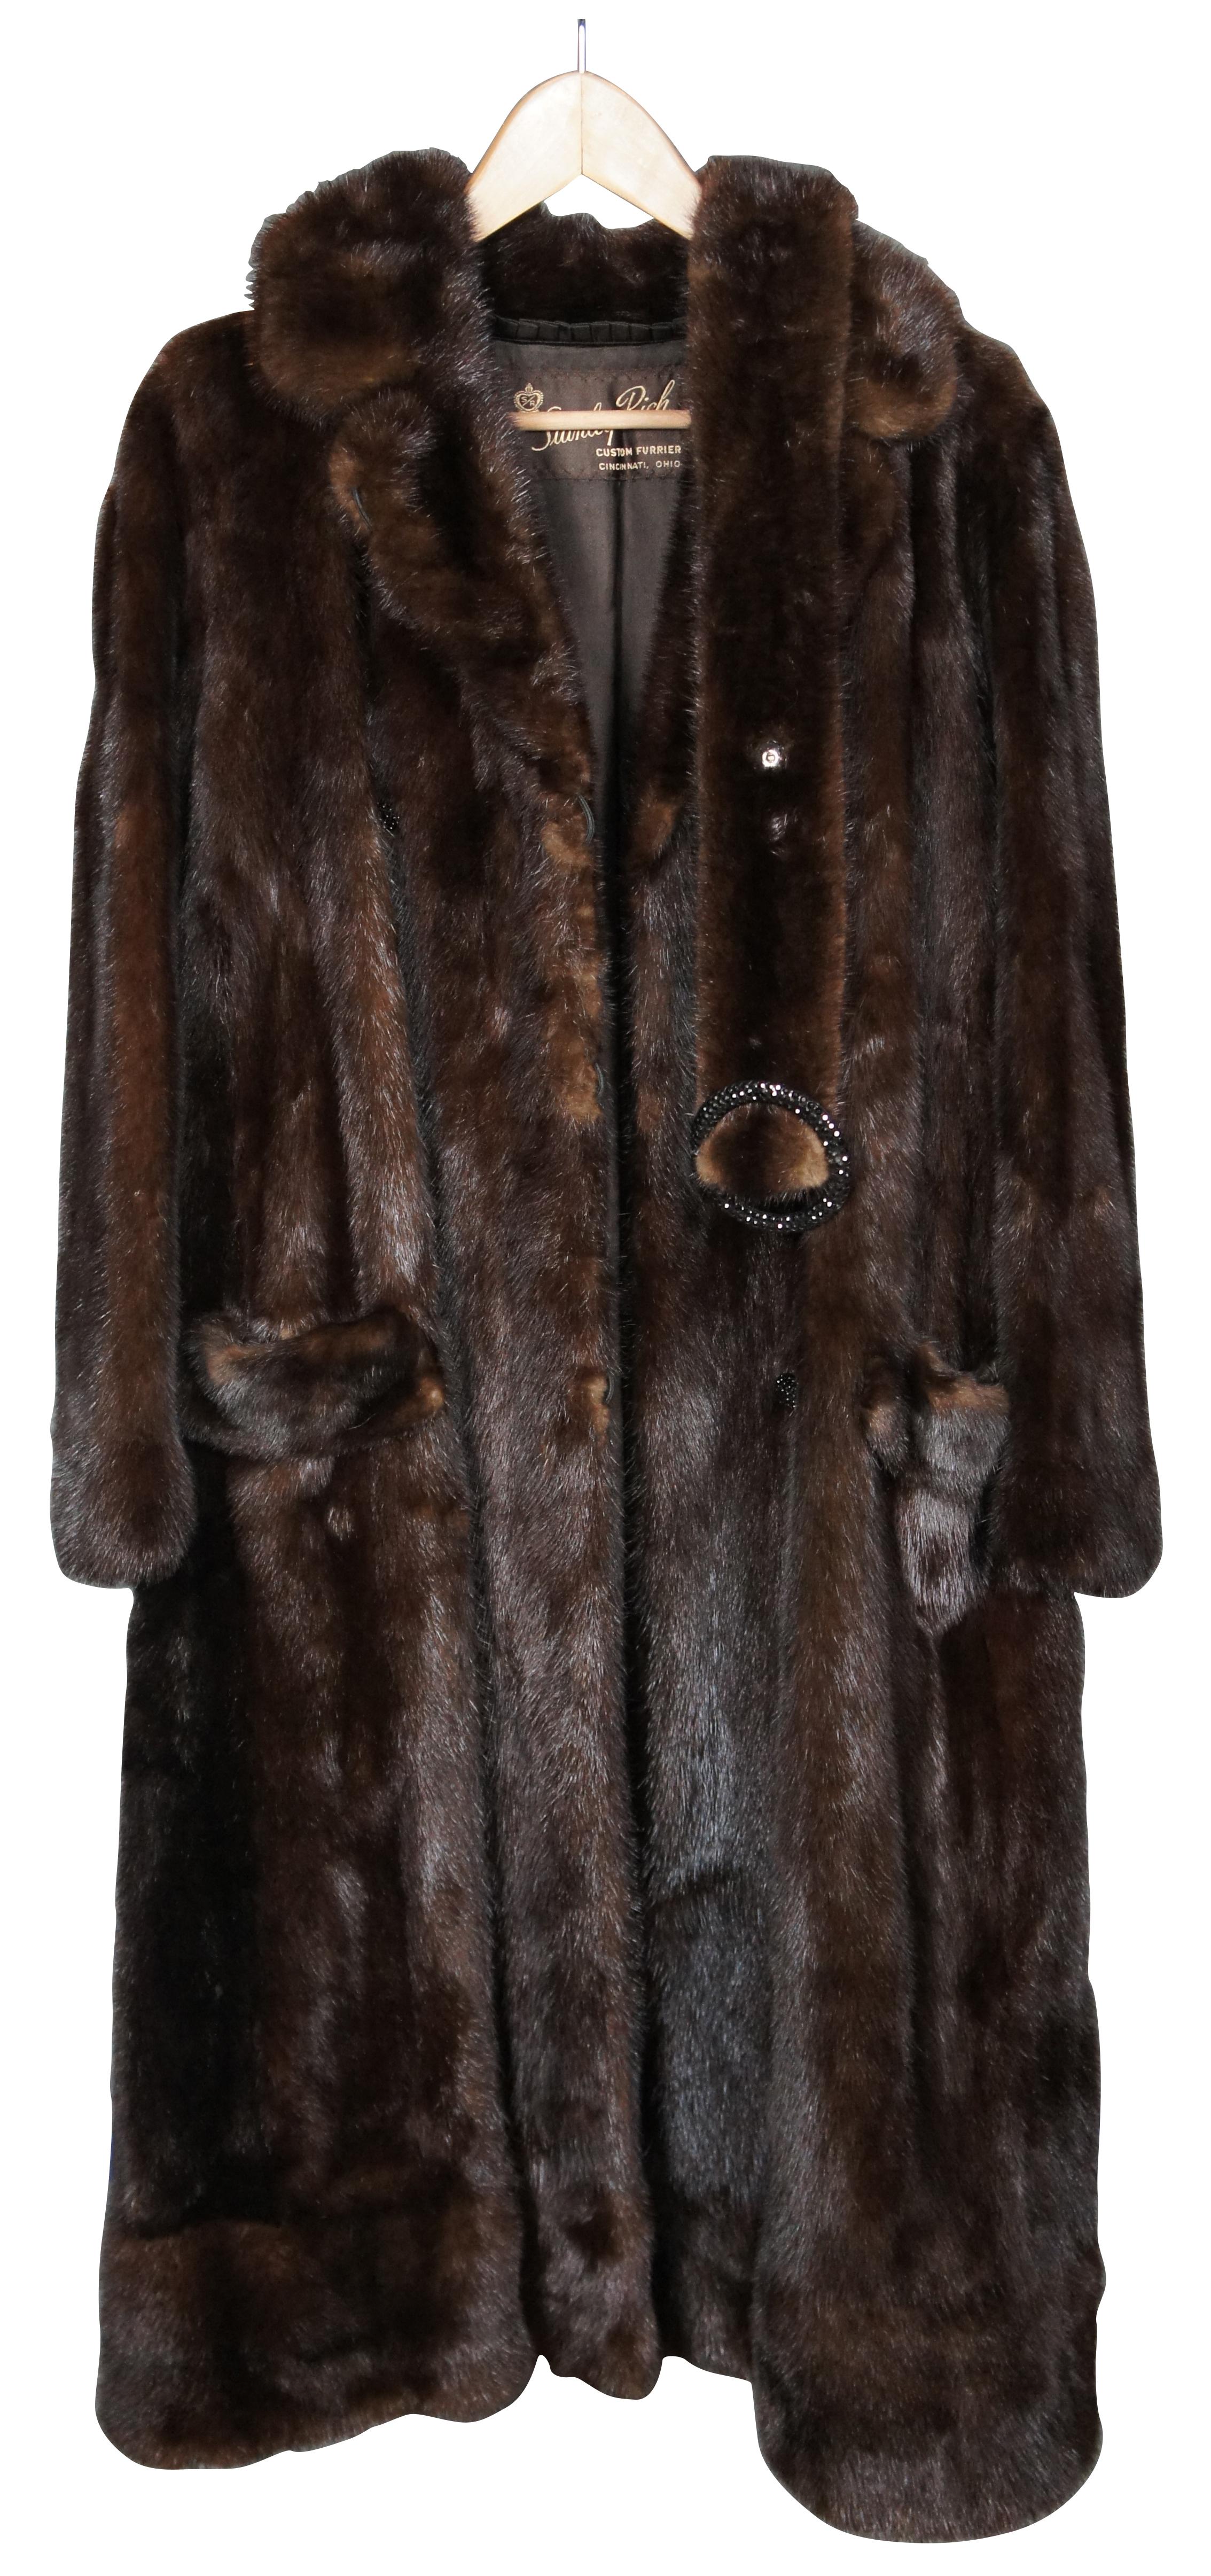 Vintage dark brown mink coat by Stanley Rich of Cincinnati, Ohio, full length with two front pockets, double breasted with two rows of black rhinestone studded buttons, and belt with matching ring buckle. Floral embroidered lining with single